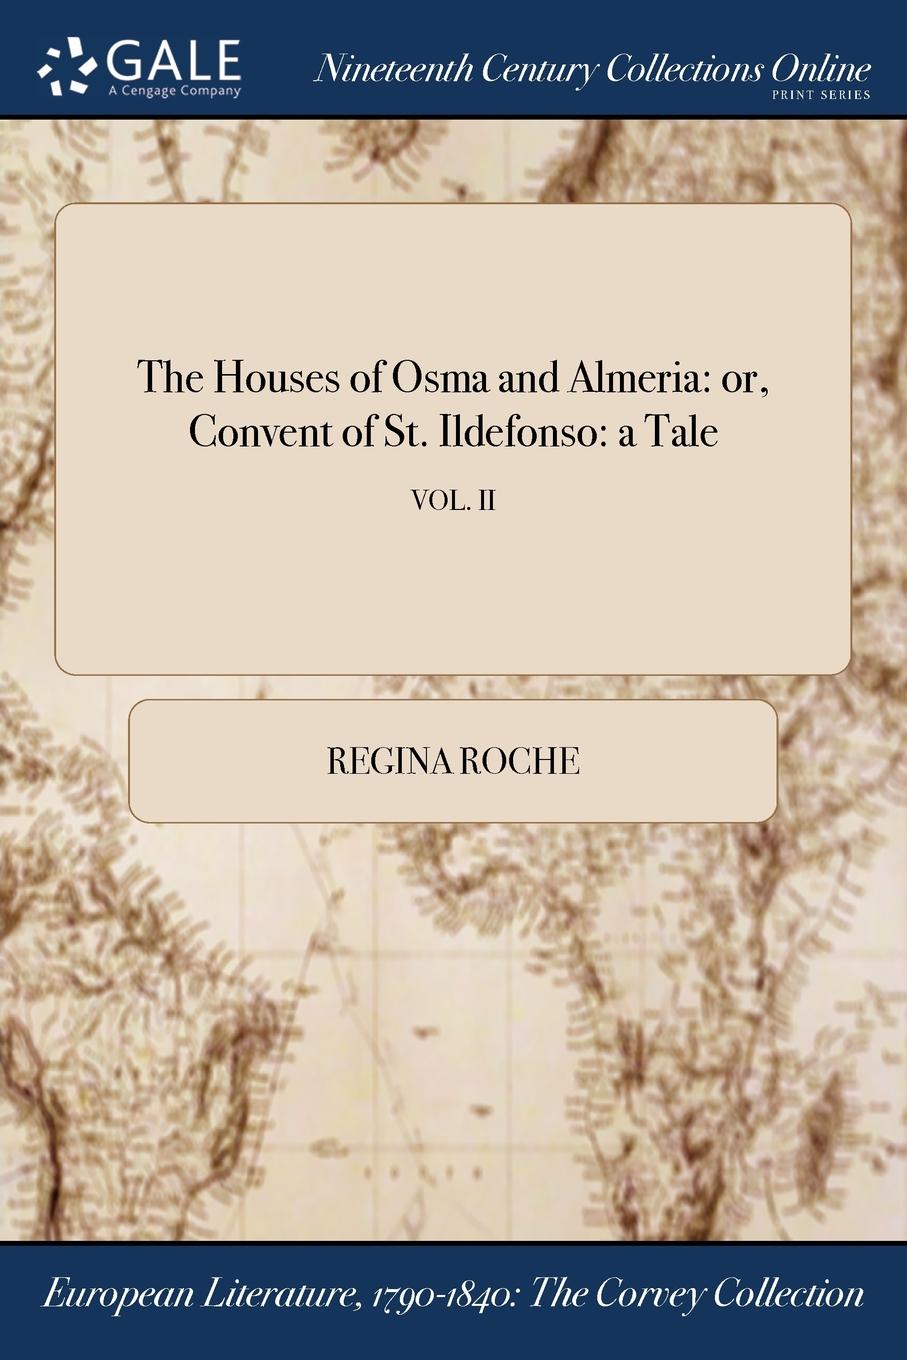 The Houses of Osma and Almeria. or, Convent of St. Ildefonso: a Tale; VOL. II